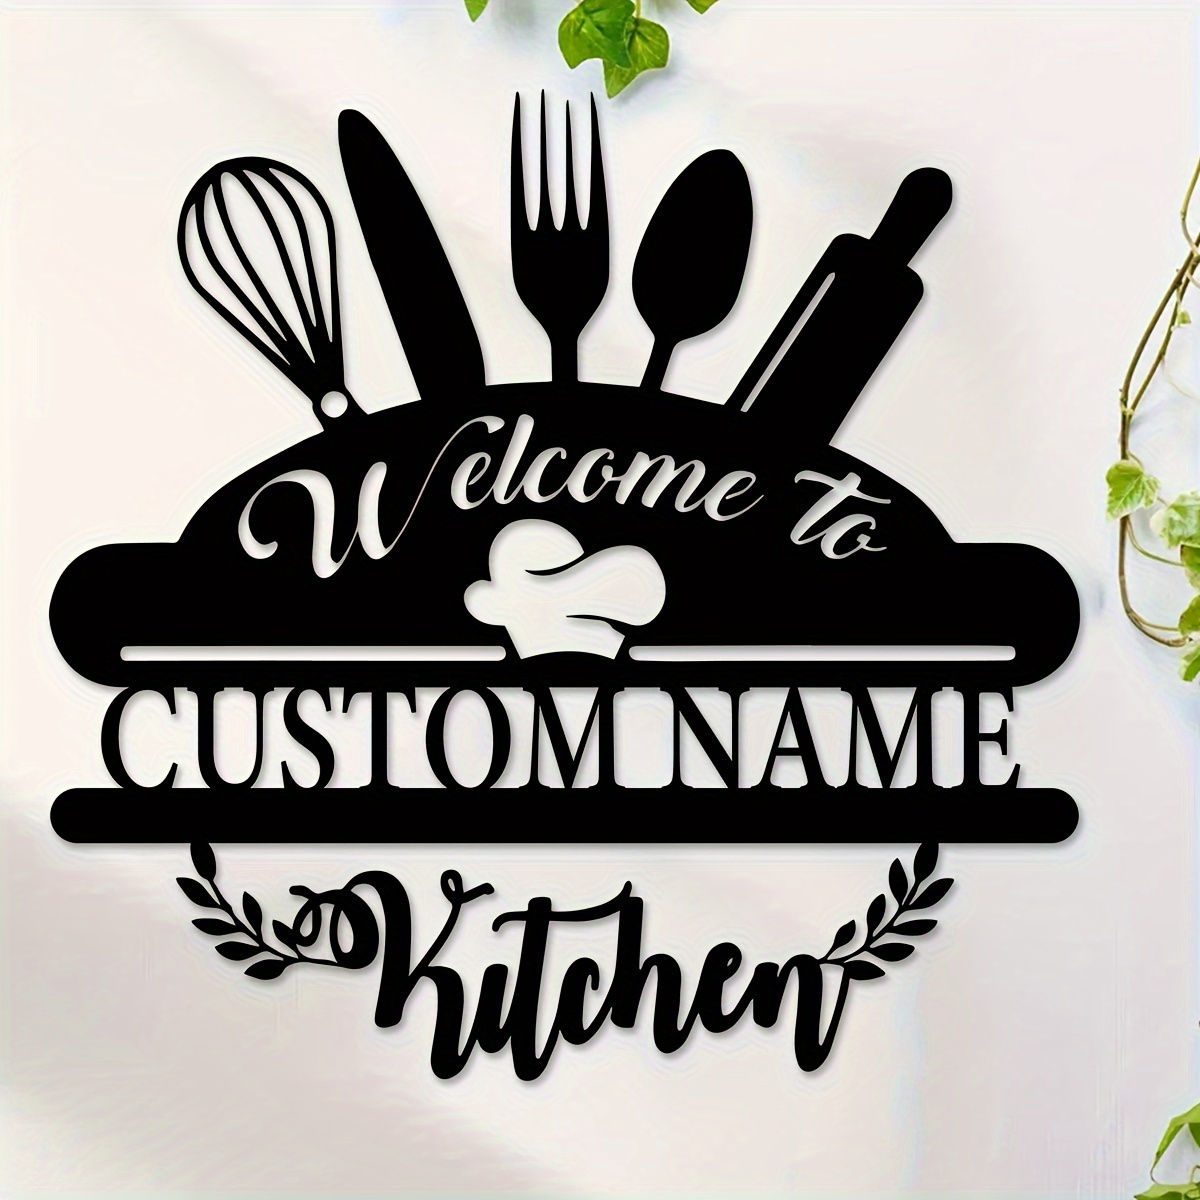 

1pc Custom Kitchen Wall Art, Personalised Kitchen Signs, Farmhouse Kitchen Wall Decor, Living Room Living Room Office Decorative Metal Art, Custom Name, Porch, Patio, Gifts